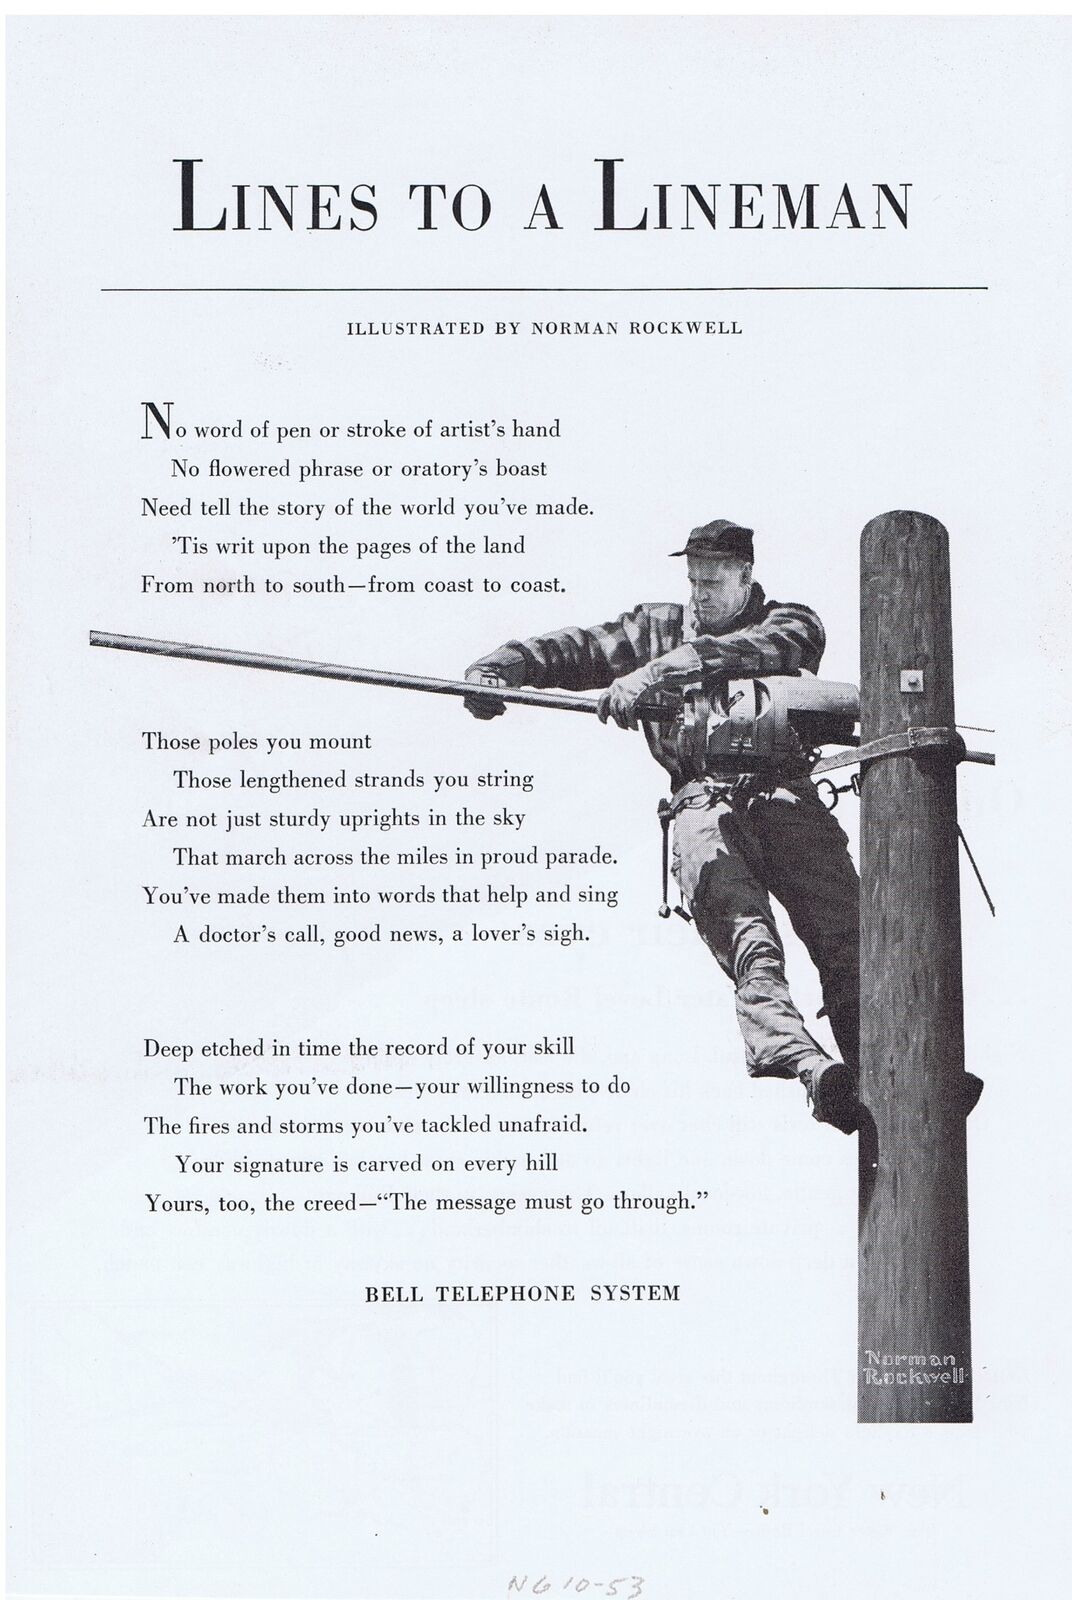 Bell telephone lineman norman rockwell print ad